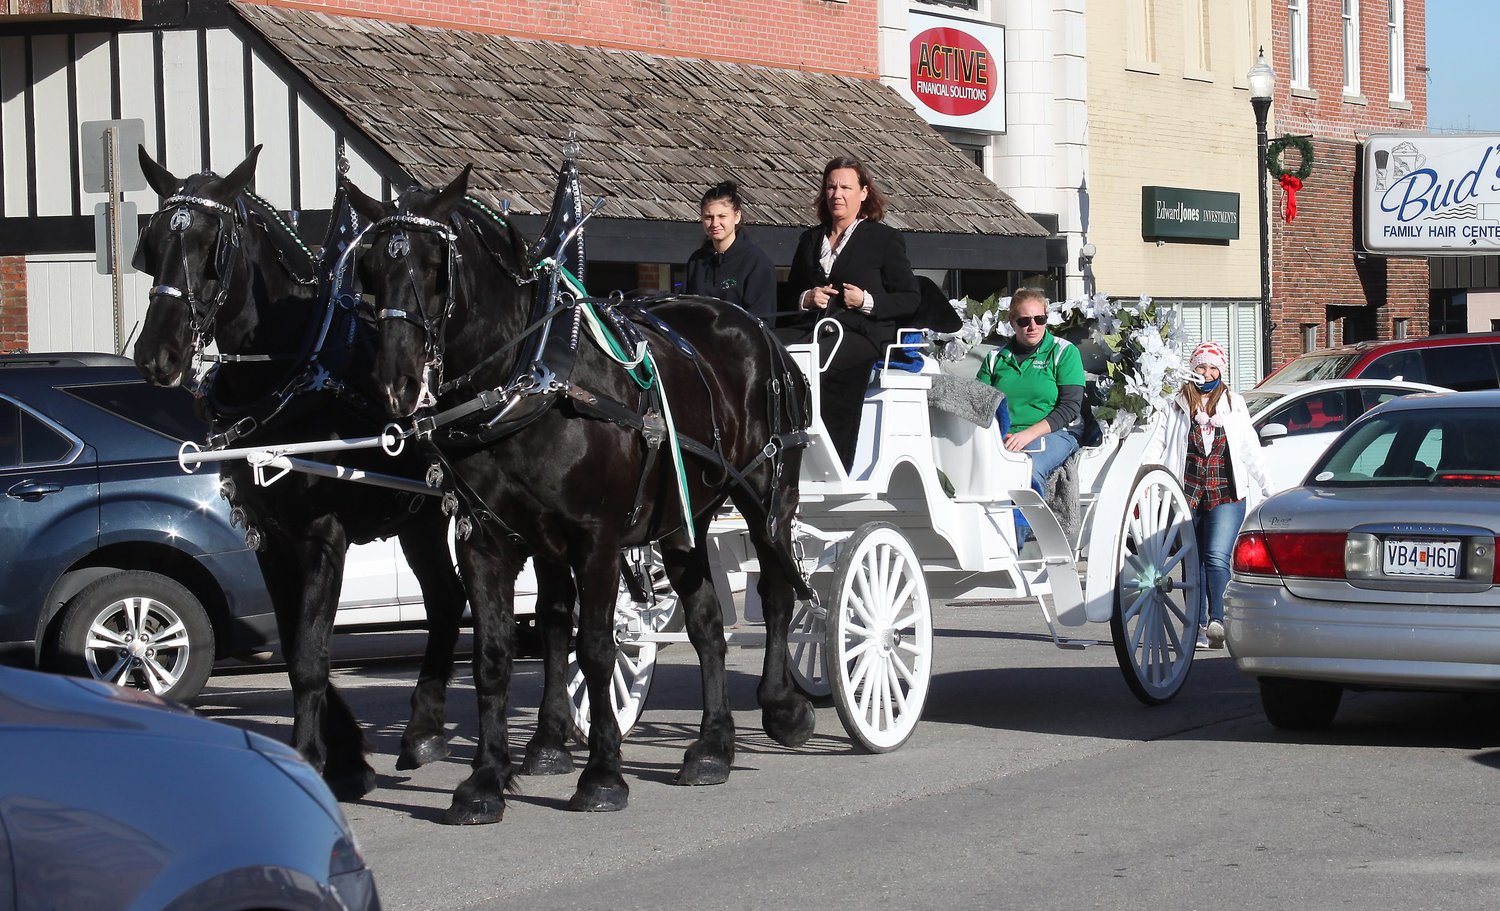 Moberly's 2020 Christmas Festival was held Dec. 5 in the downtown district from 10 a.m. - 7 p.m. In addition to special discounts offered by downtown merchants, several independent vendors were present selling a variety of different merchandise. Horse drawn carriage rides and photos with Santa Claus were offered. Due to COVID-related restrictions, the annual Christmas Parade  forced participants to not to mobilize and instead invited motorists to drive by and persons to walk by their creations to view. A Christmas Tree lighting ceremony was held at Depot Park and the annual Living Windows event culminated the festival.